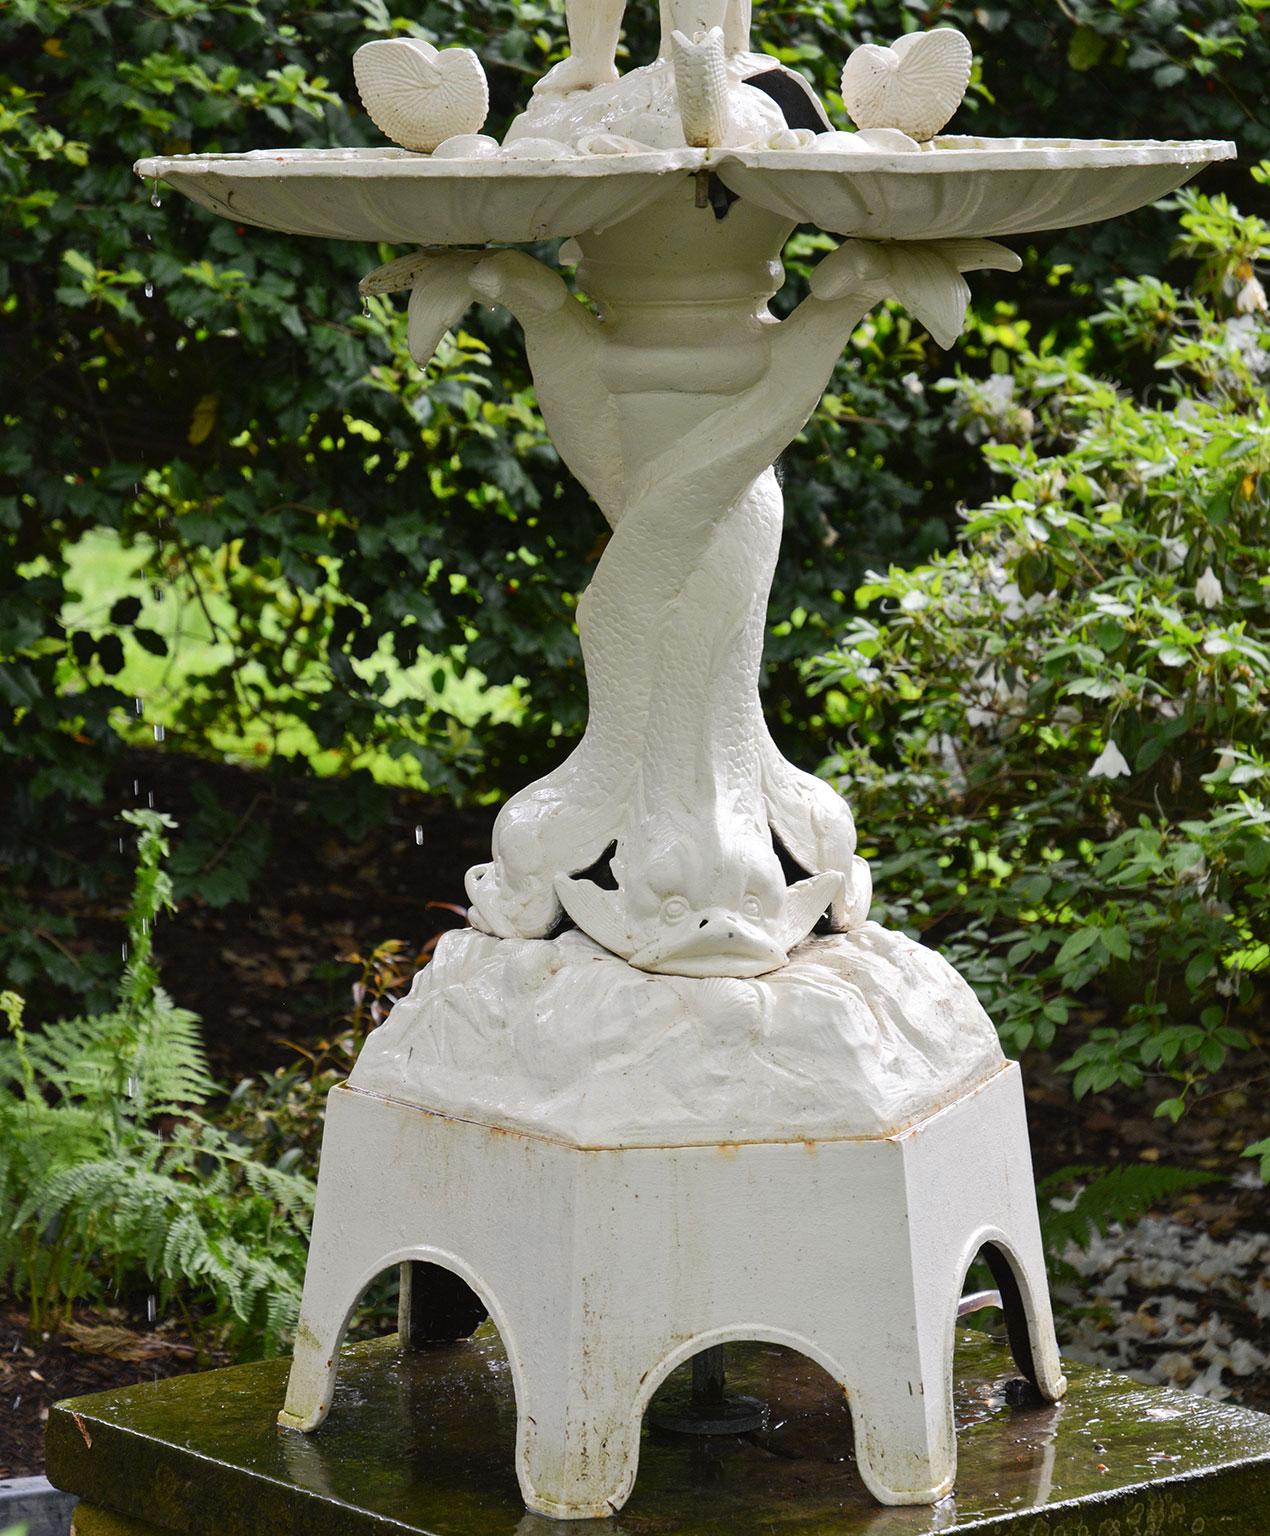 Early 20th Century Cast-Iron Fountain from Fiske Family